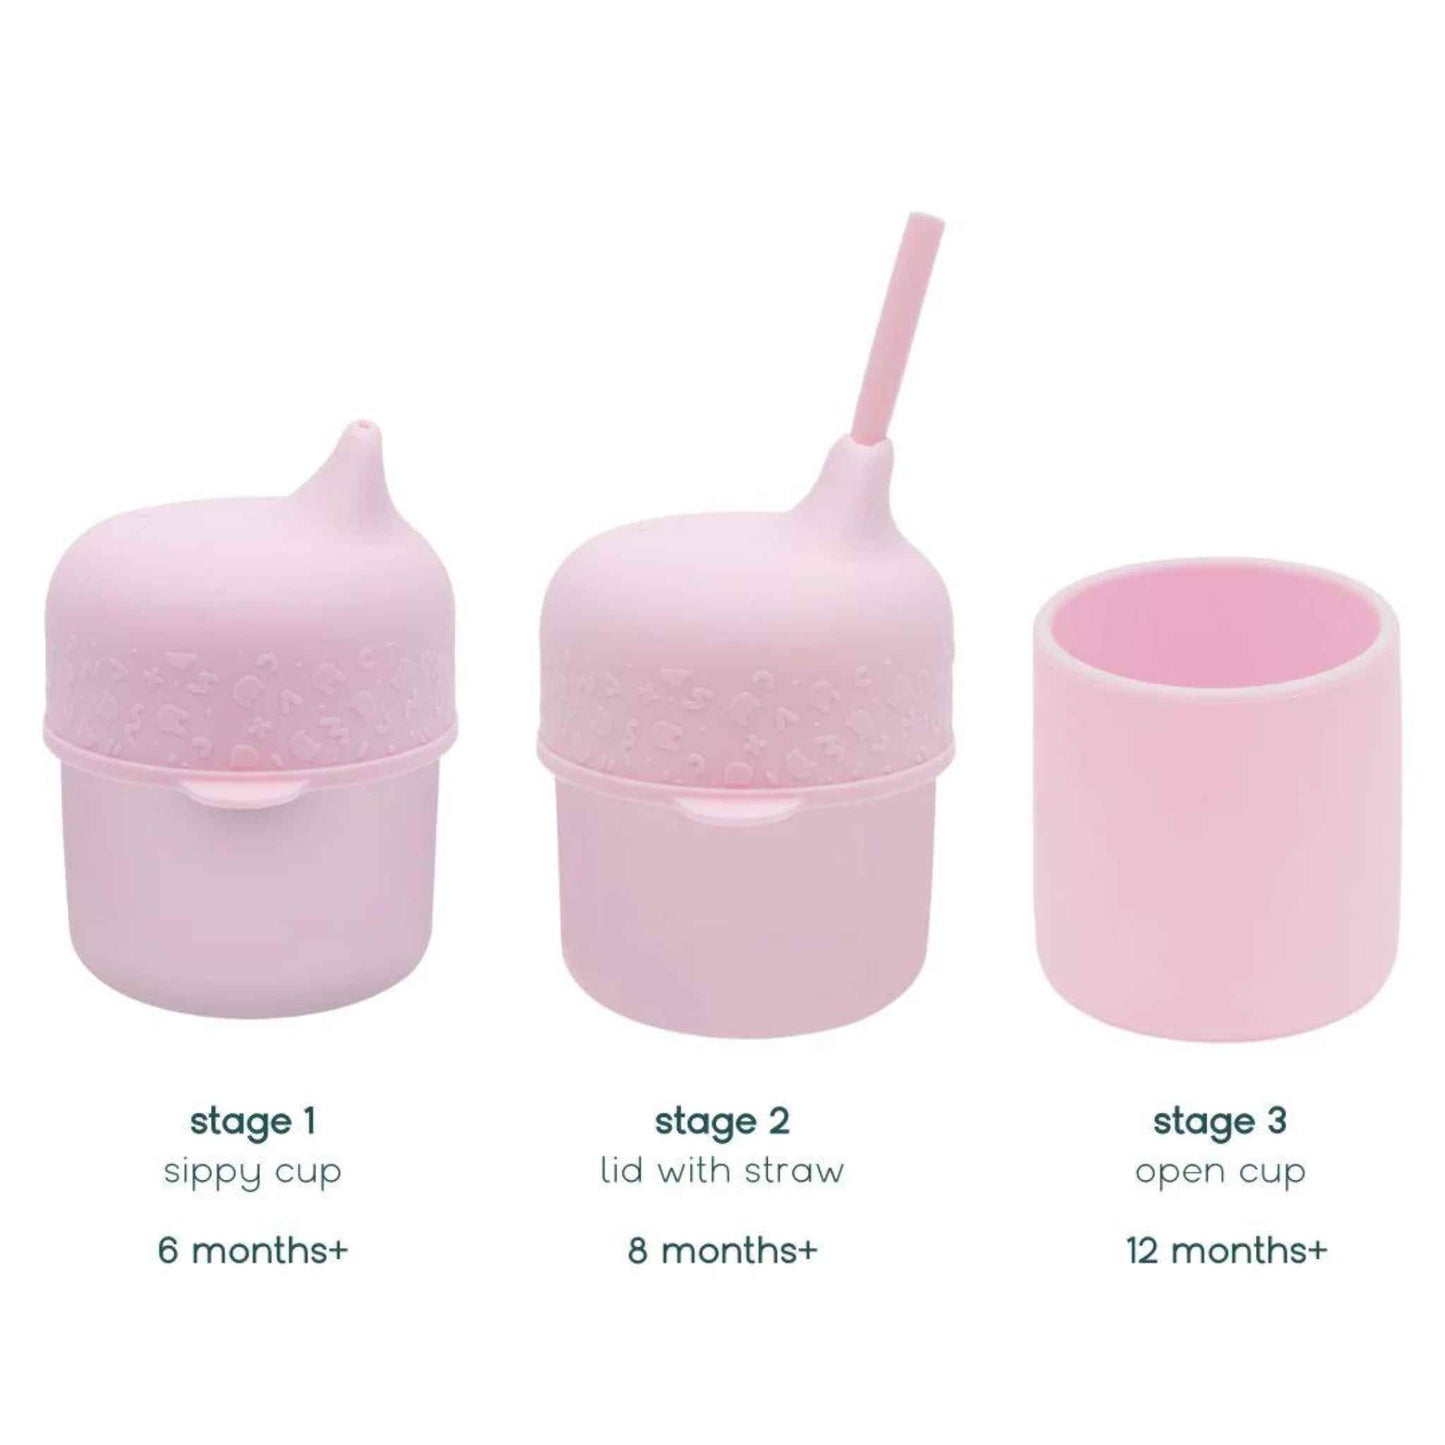 We Might Be Tiny's Sippie cup Set in powder pink comes with 1 grip cup, a no spill sippie lid and a mini straw to see your little one through all developmental stages. this set is gift boxing, ready for gifting to babies or is a great gift for children